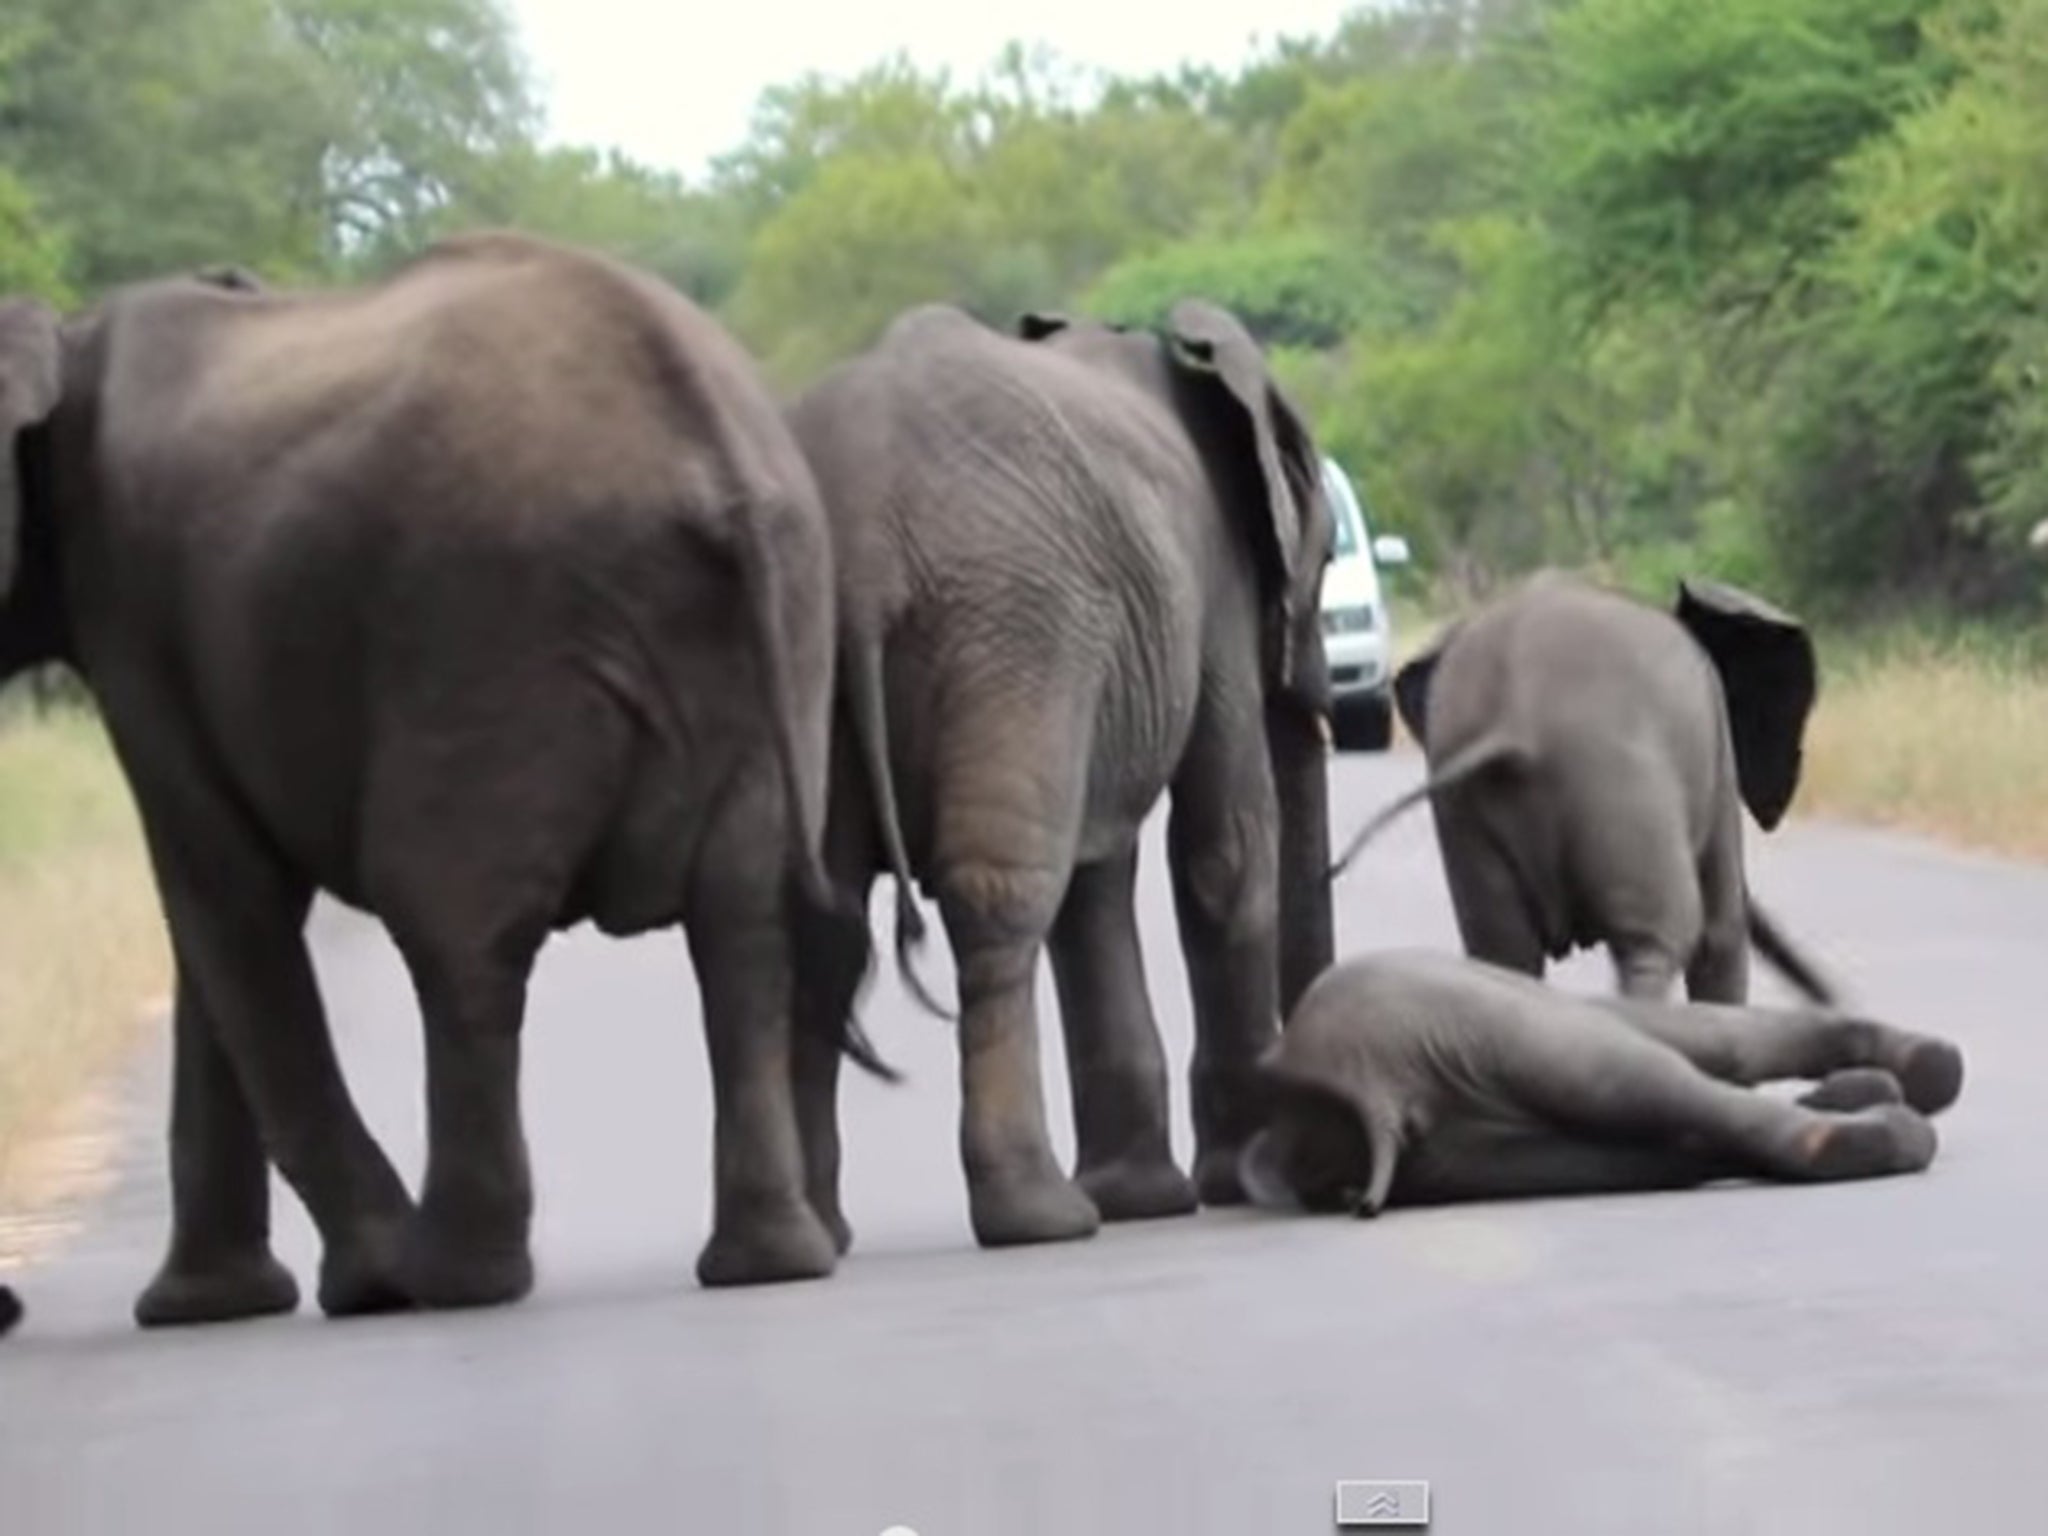 Young elephant saved by herd of elephants